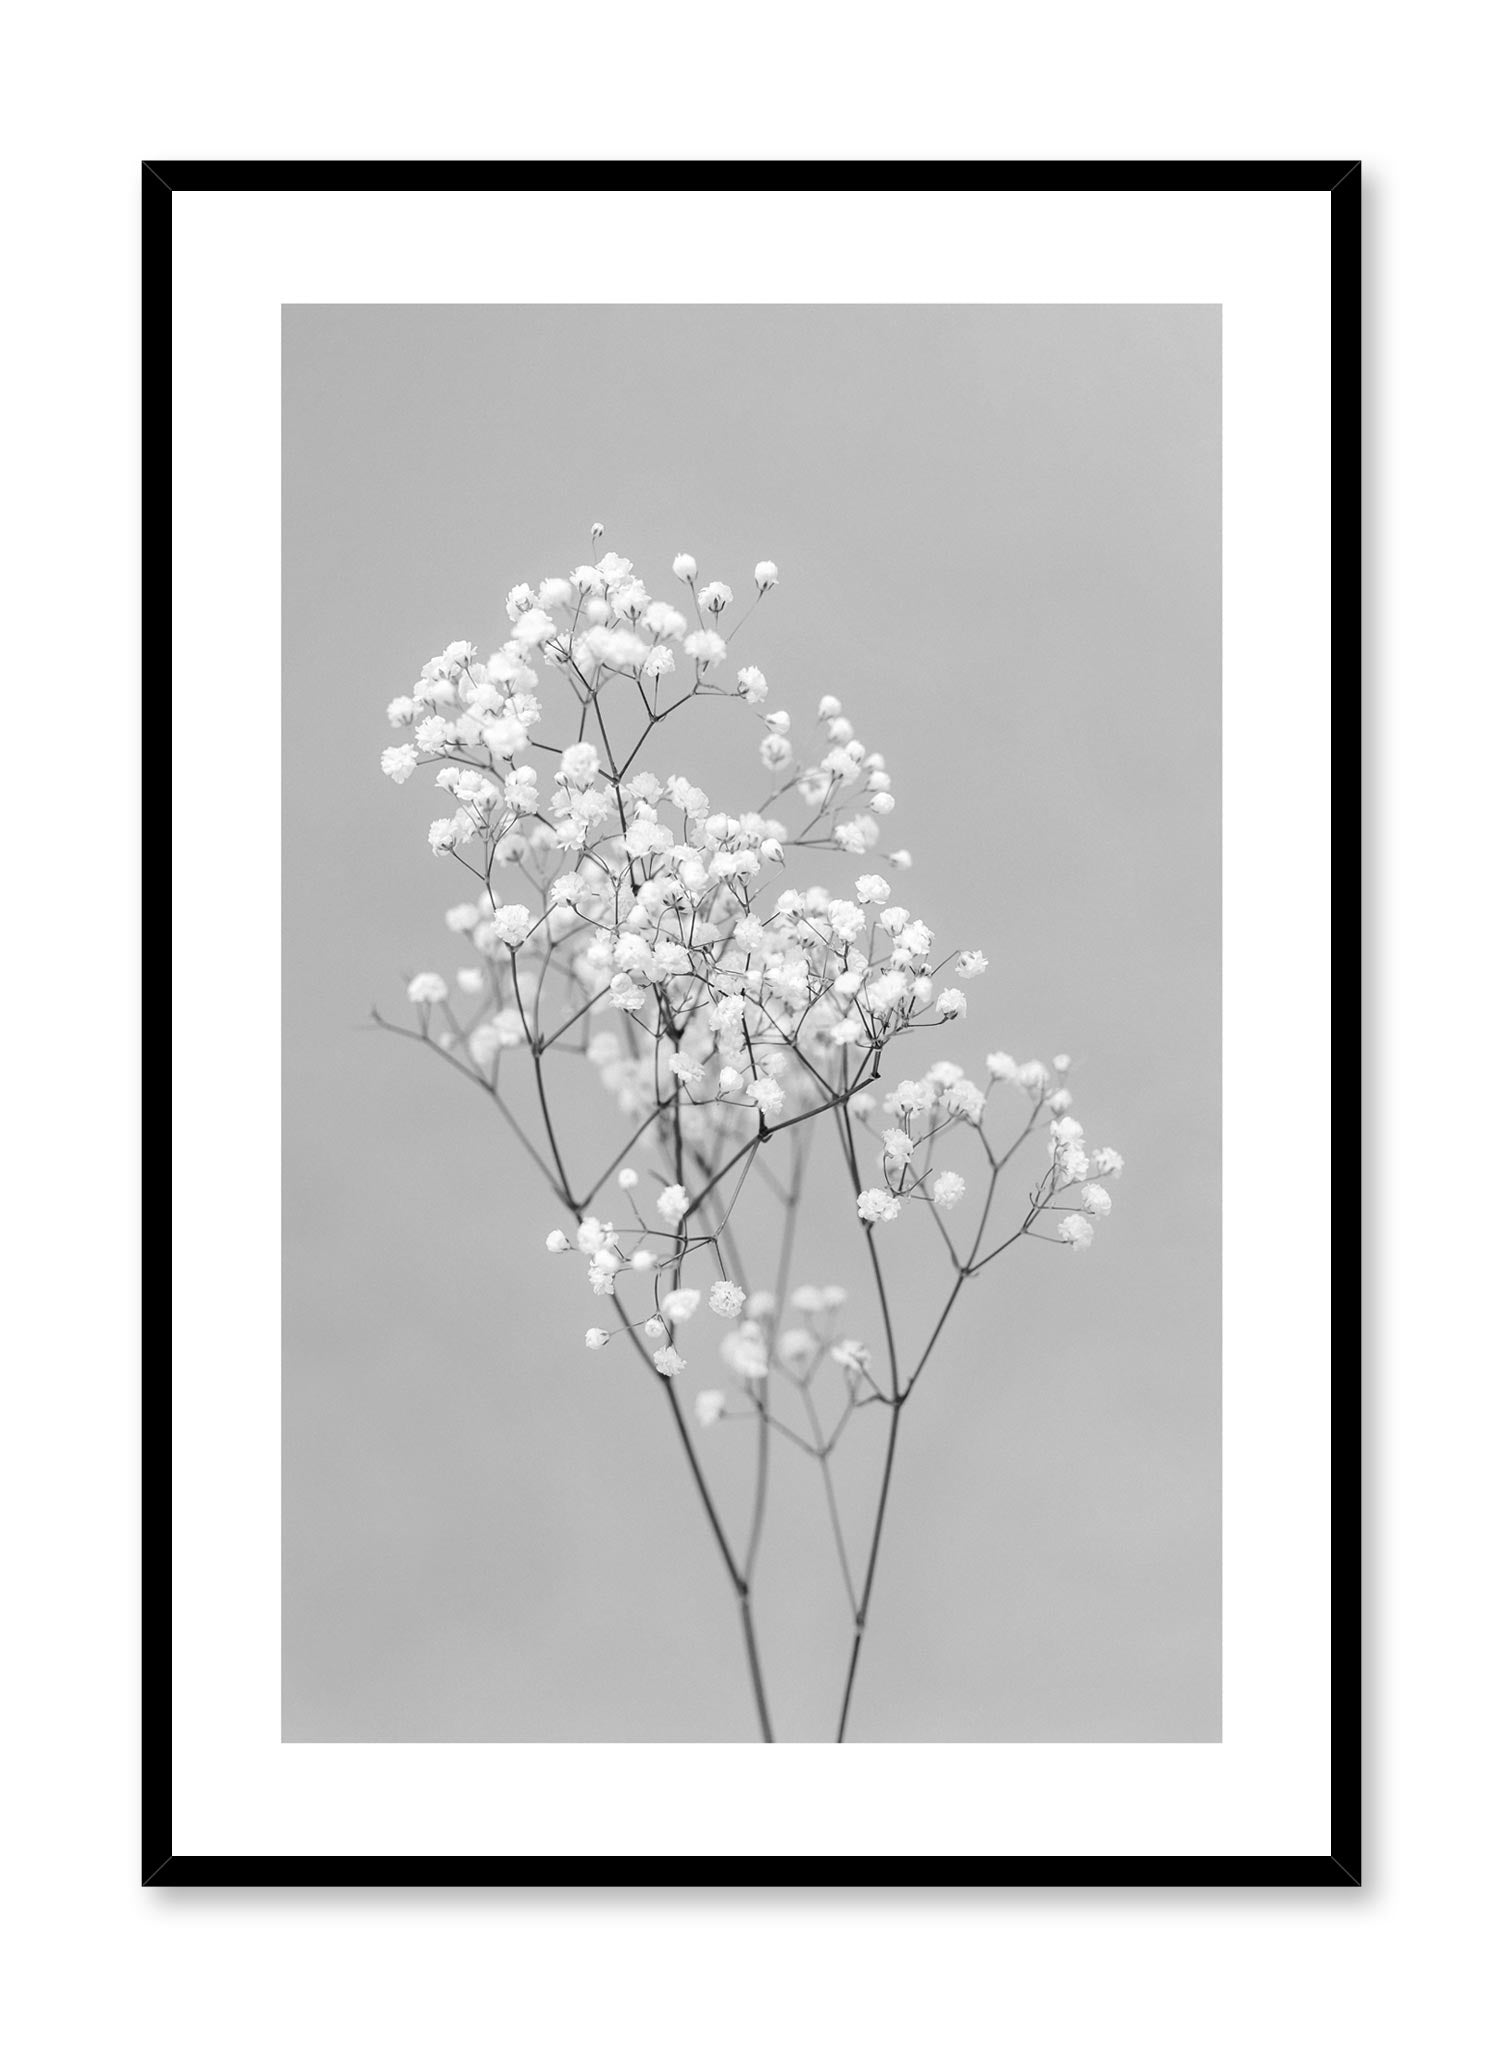 Minimalistic wall photography by Opposite Wall with Baby's Breath flower in black and white